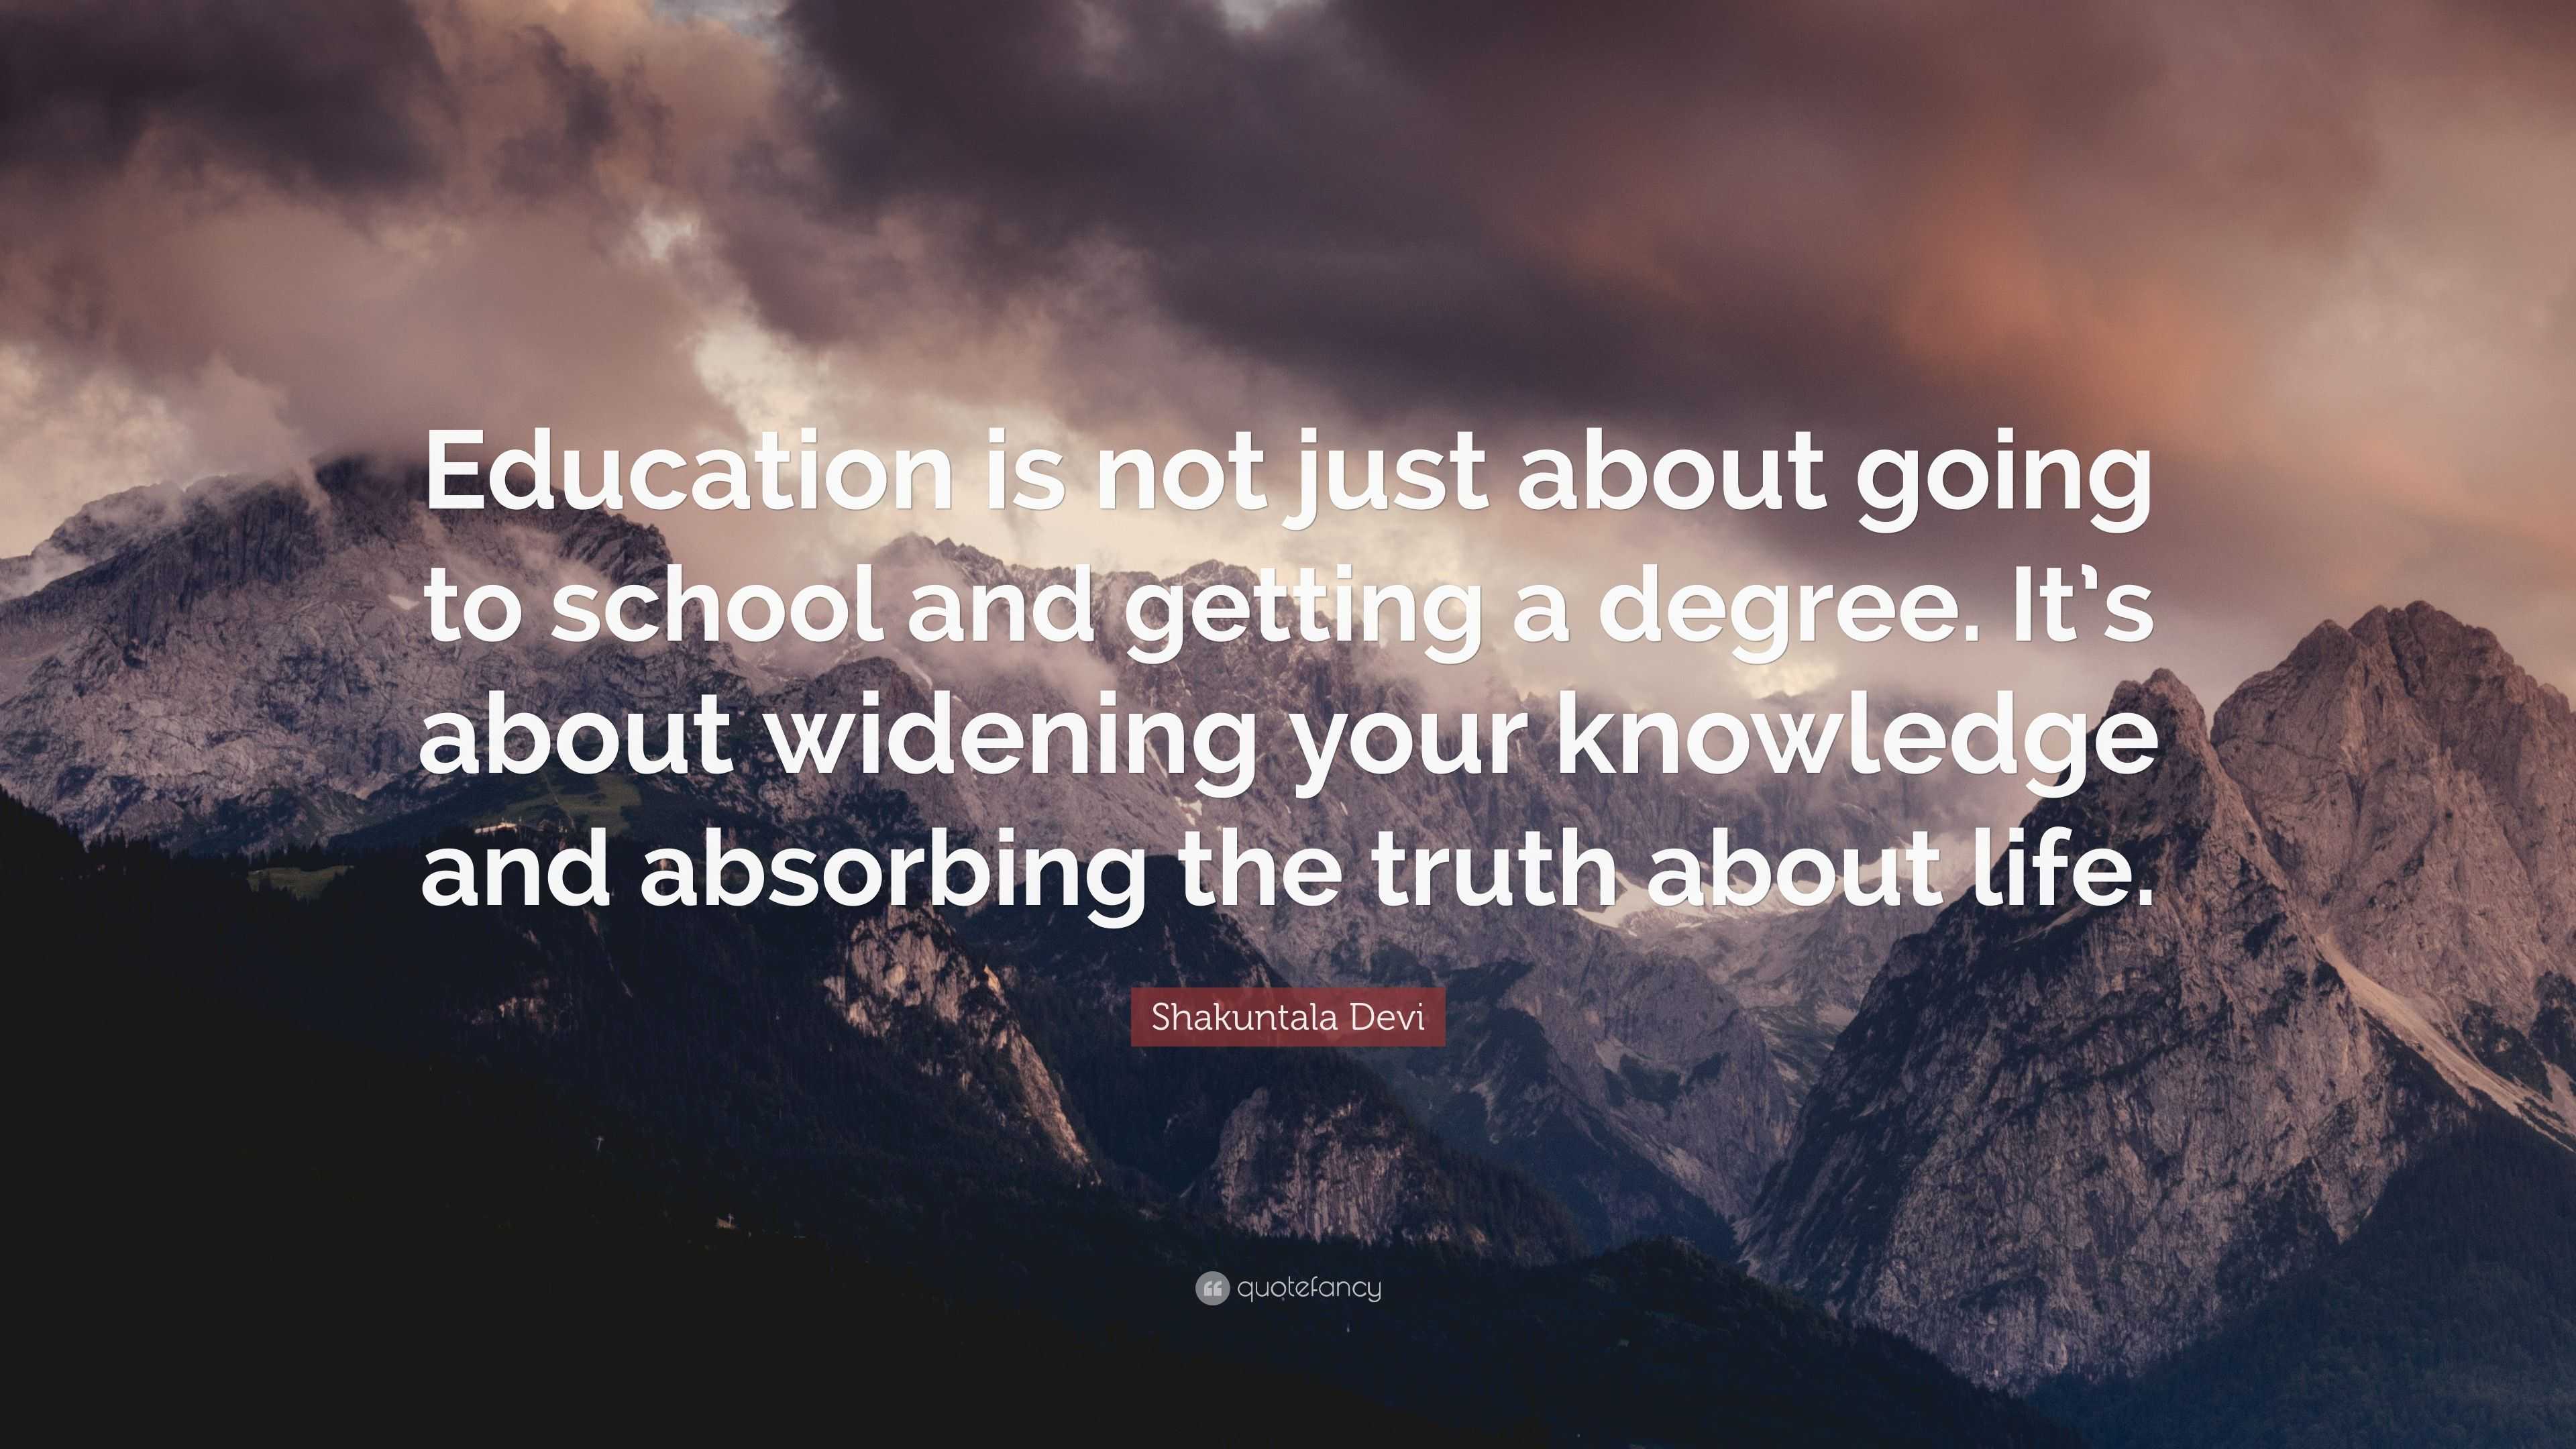 Shakuntala Devi Quote “Education is not just about going to school and